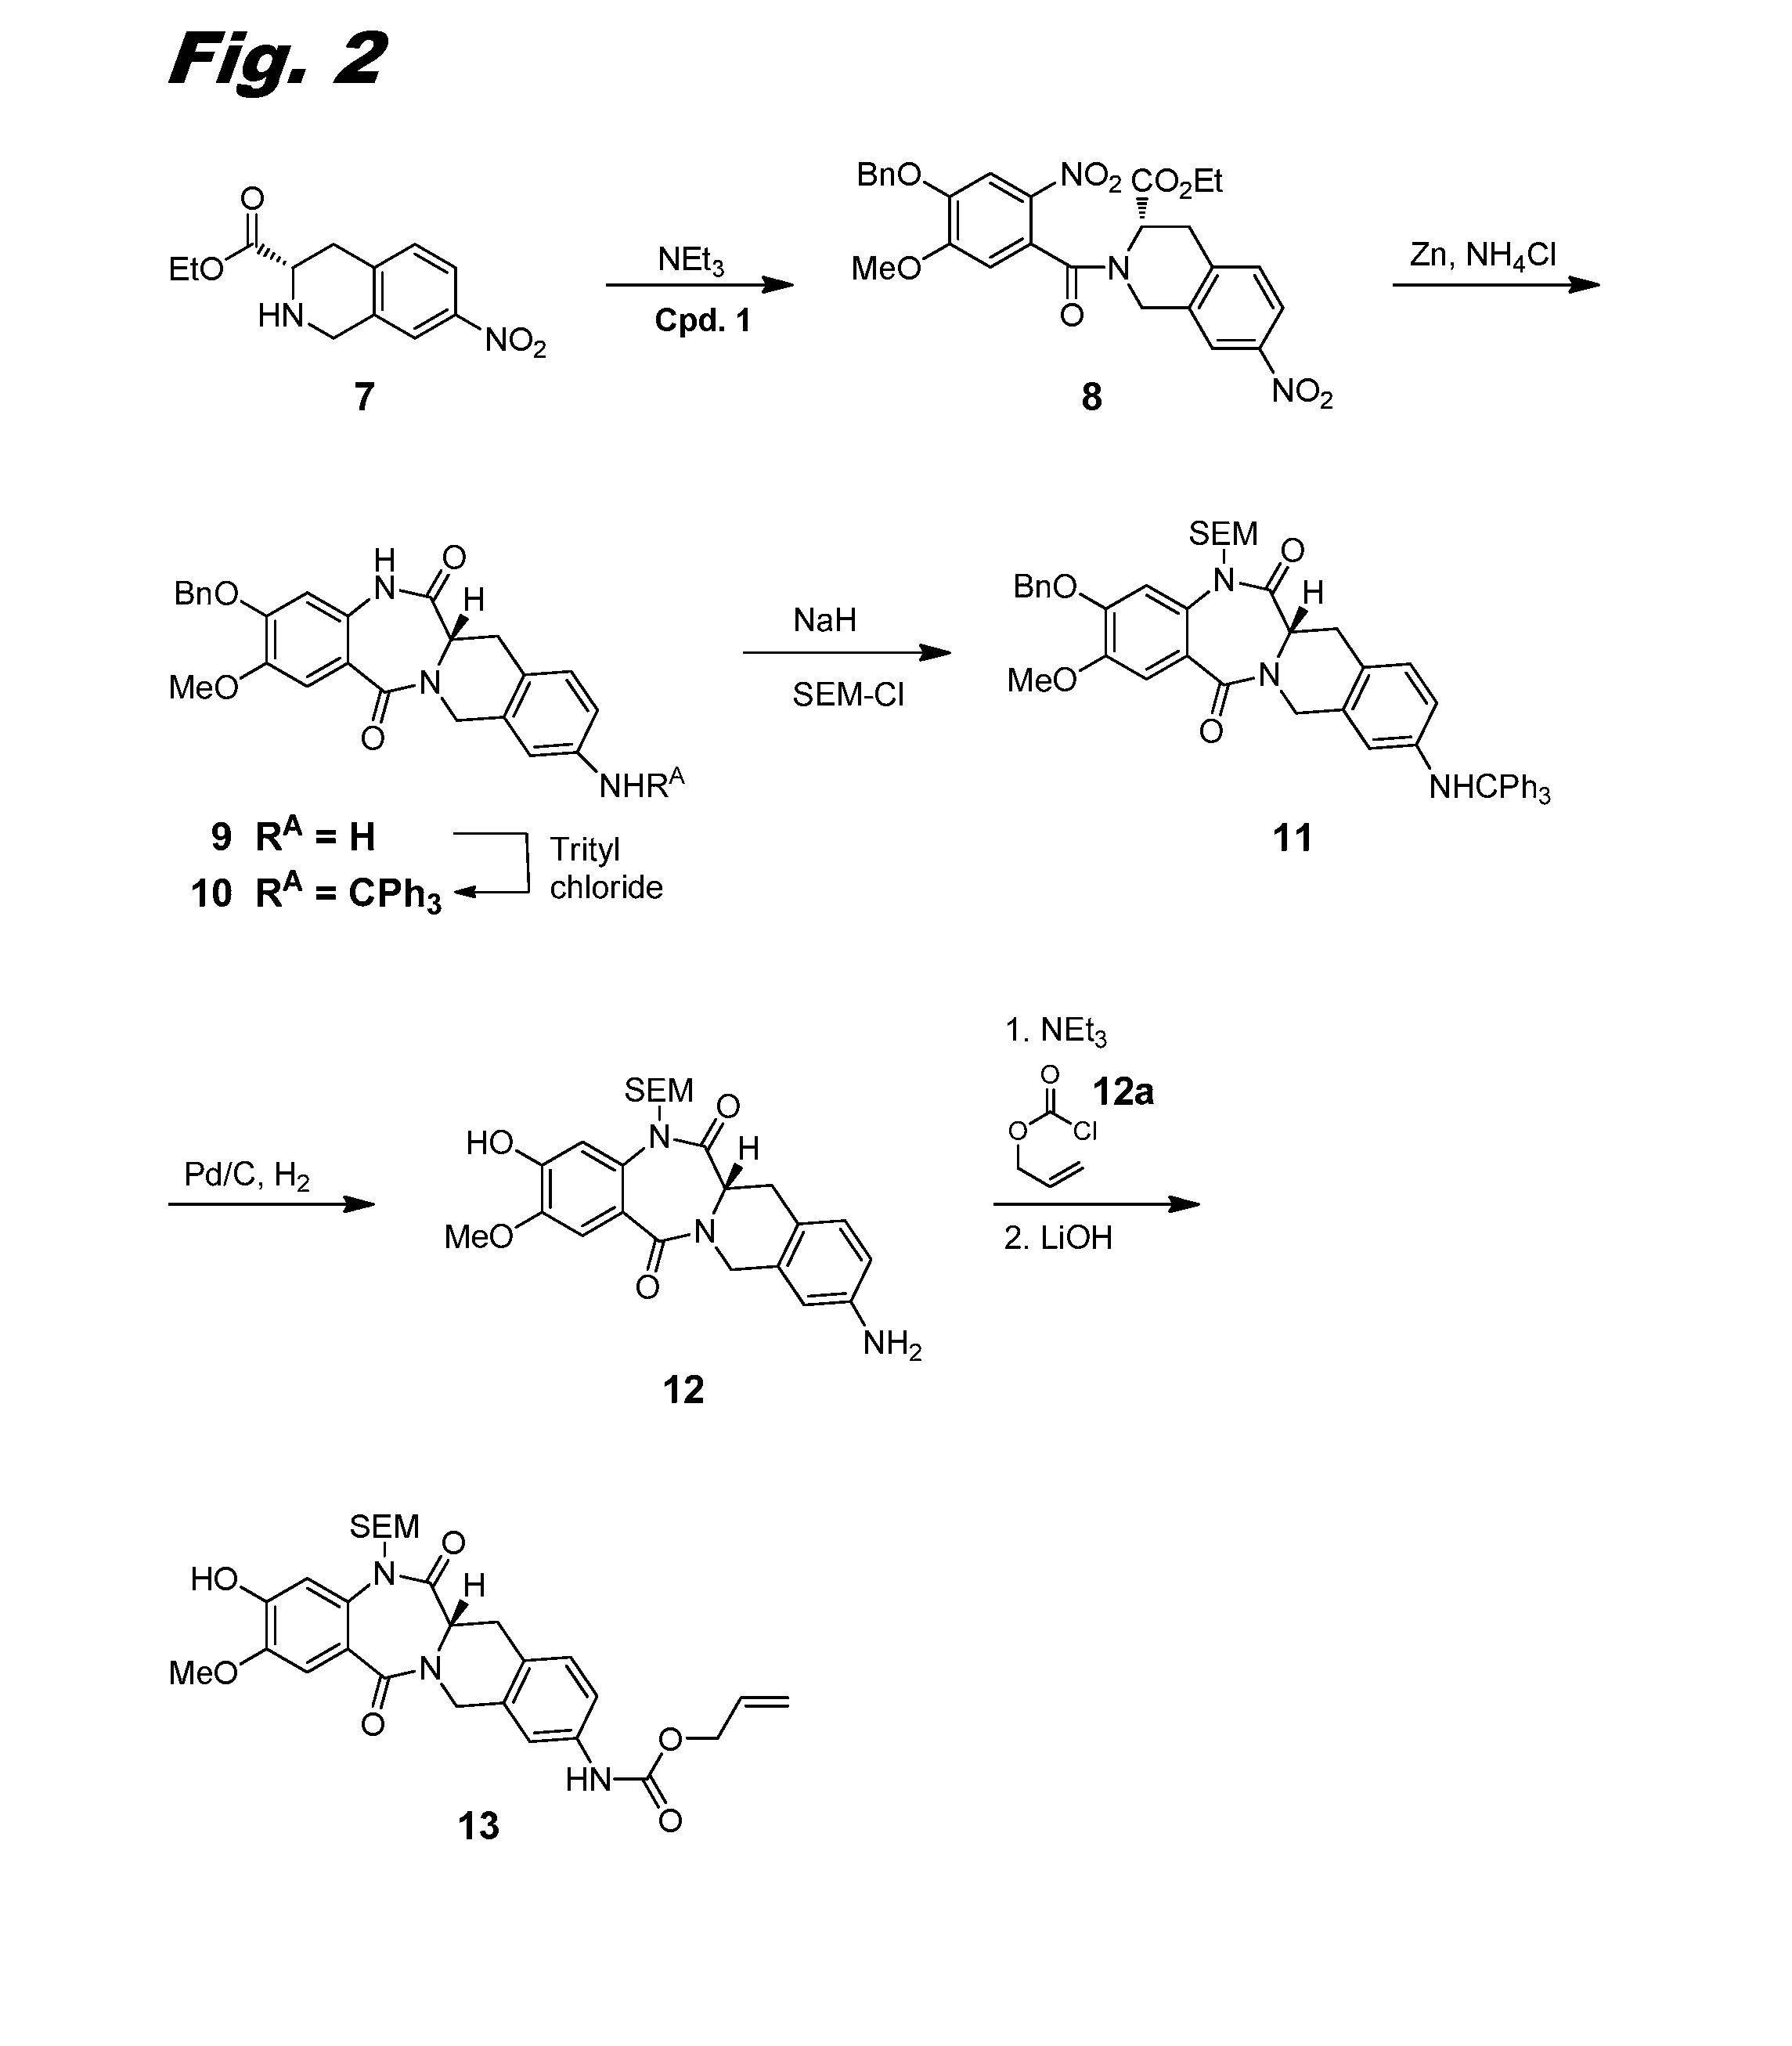 Benzodiazepine dimers, conjugates thereof, and methods of making and using